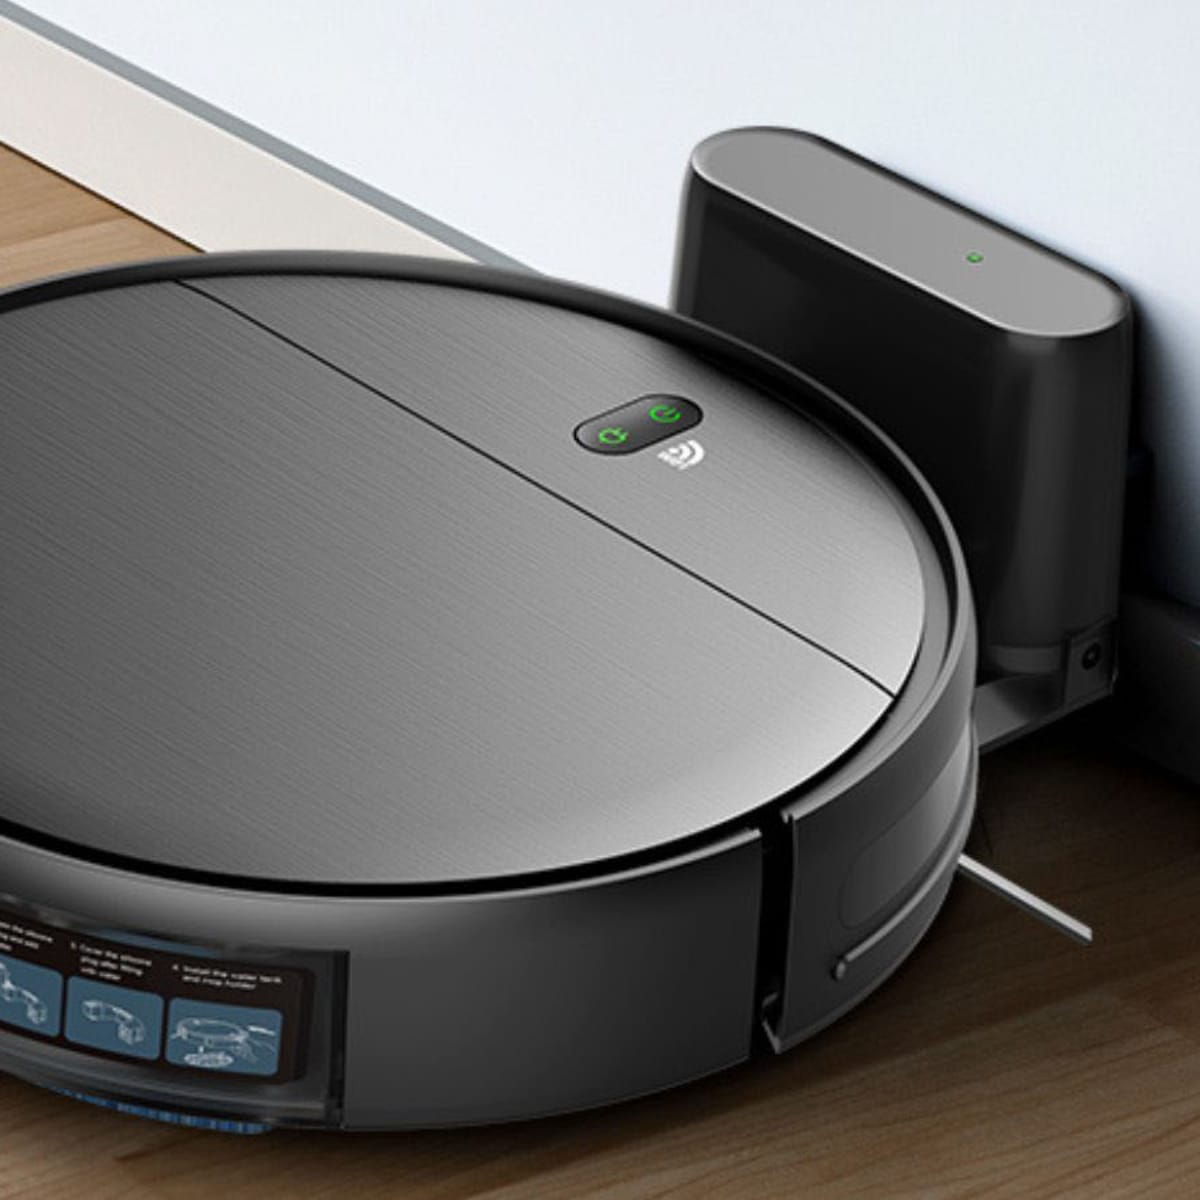 Roborock launching two affordable robot vacuums in October